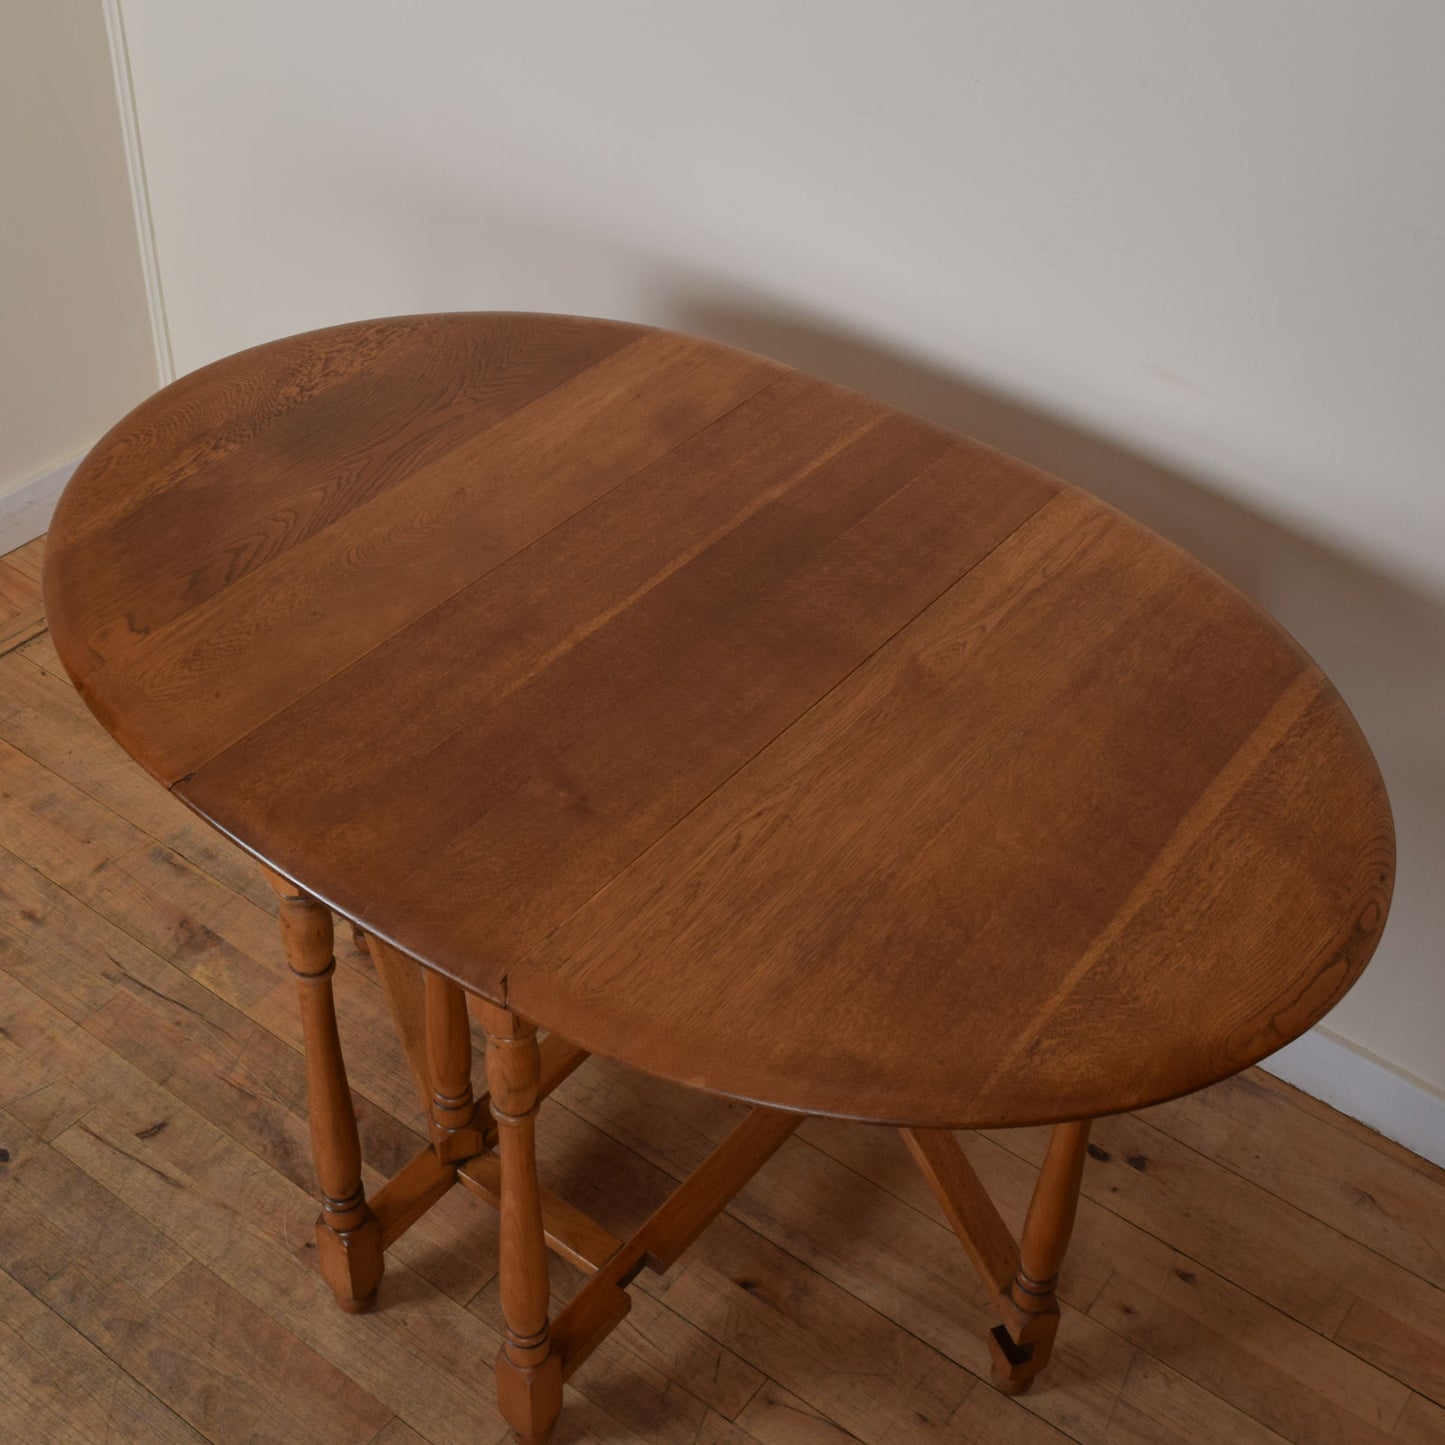 Oak Drop Leaf Table and Two Chairs